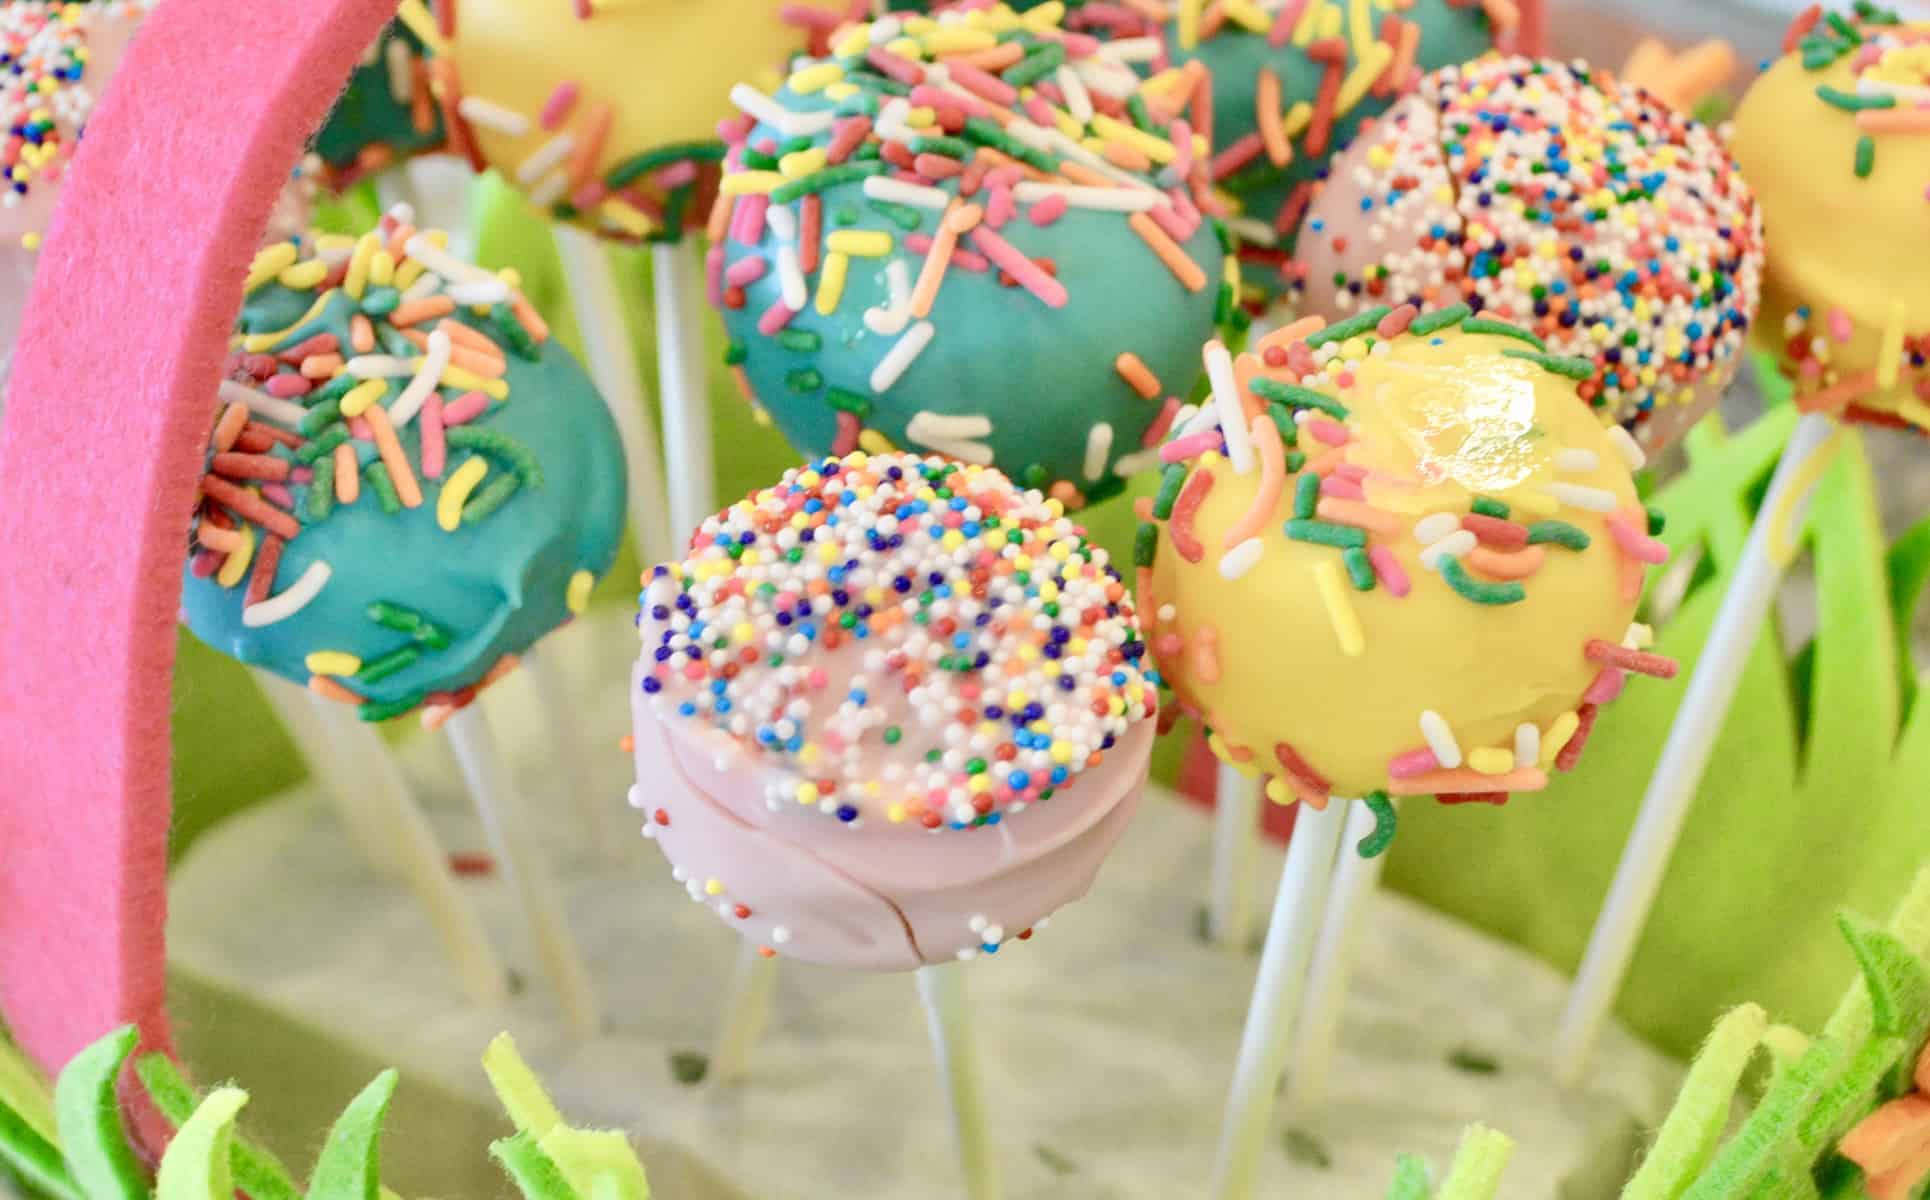 Oreo Cake Pops are an easy recipe with only three ingredients! Oreos, cream cheese, and candy melts, this dessert recipe for Oreo cake pops is so simple and make-ahead. #cakepops #easy #recipe #oreos #creamcheese #stepbystep #guide #candymelts #birthdayparty #parenting #kids #easydessert #onastick